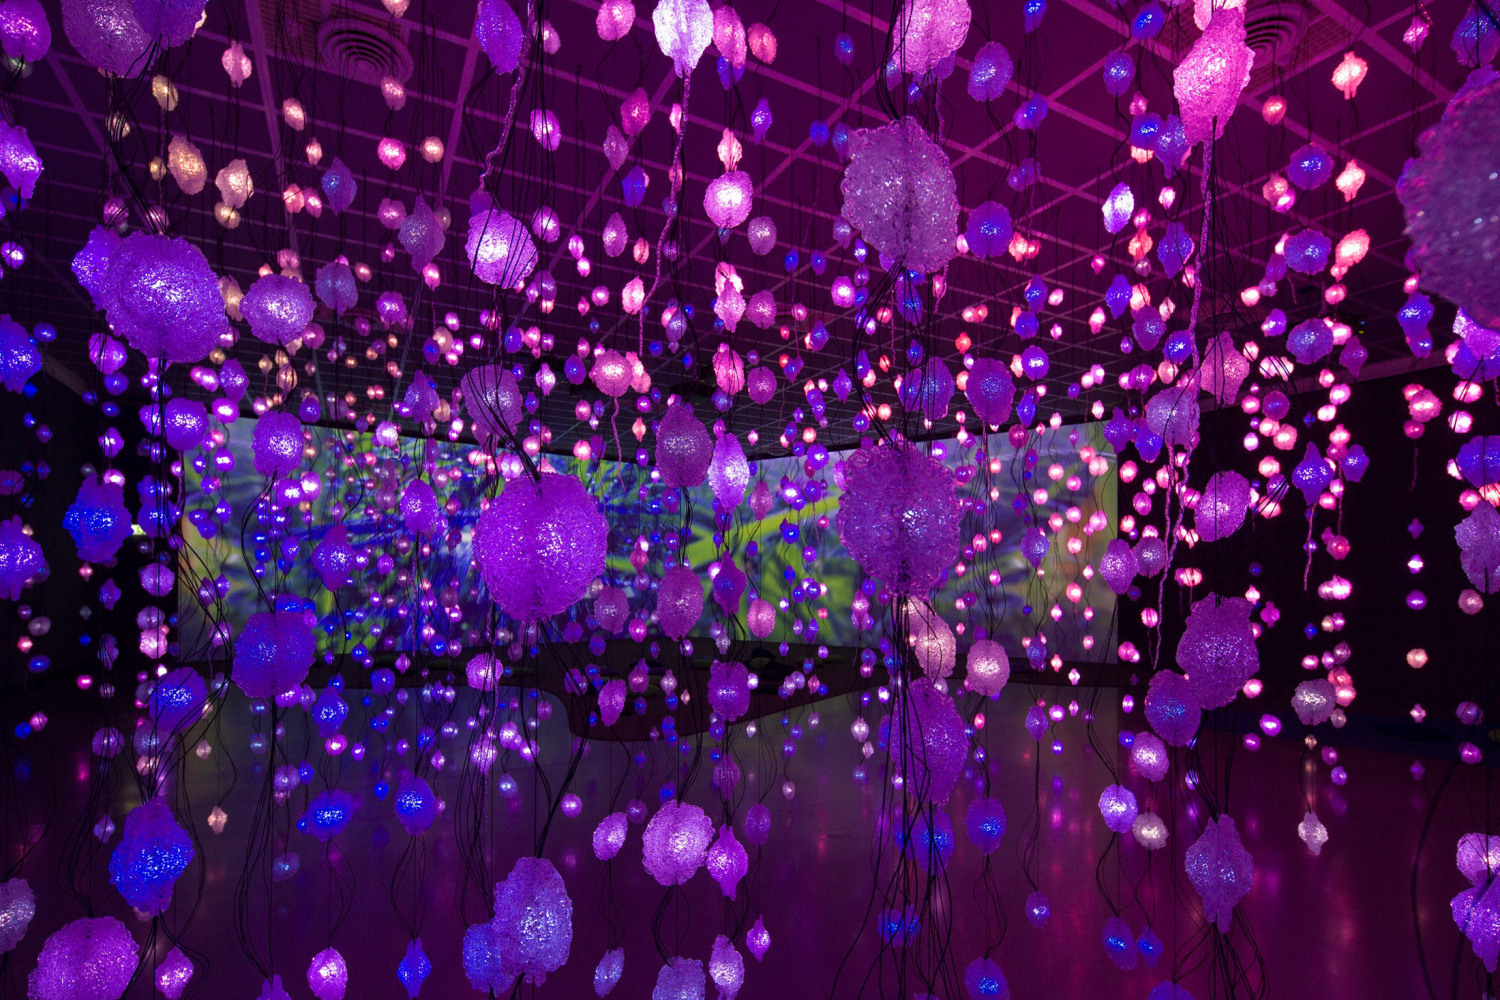 Pipilotti Rist
Pixelwald (Pixel Forest), 2016
Hanging LED light installation and media player
Duration: 35 minutes
Dimensions variable
Installation view, Kunsthaus Z&amp;uuml;rich, 2016